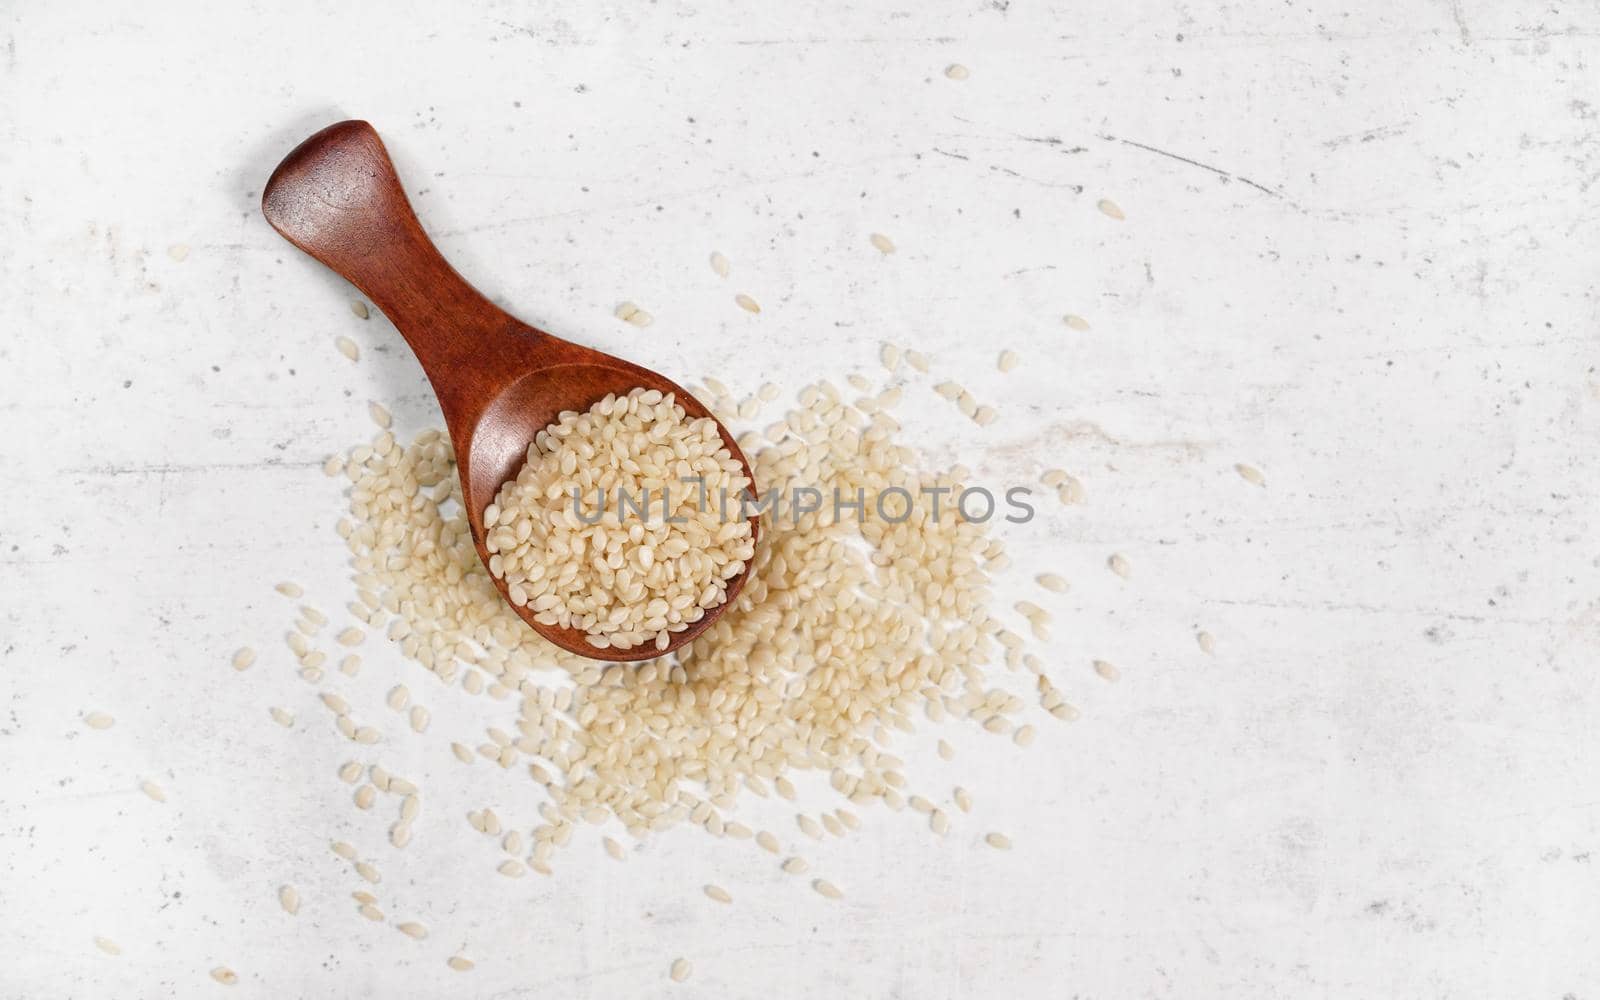 White sesame - Sesamum indicum - seeds in small wooden spoon on white stone like board, view from above.